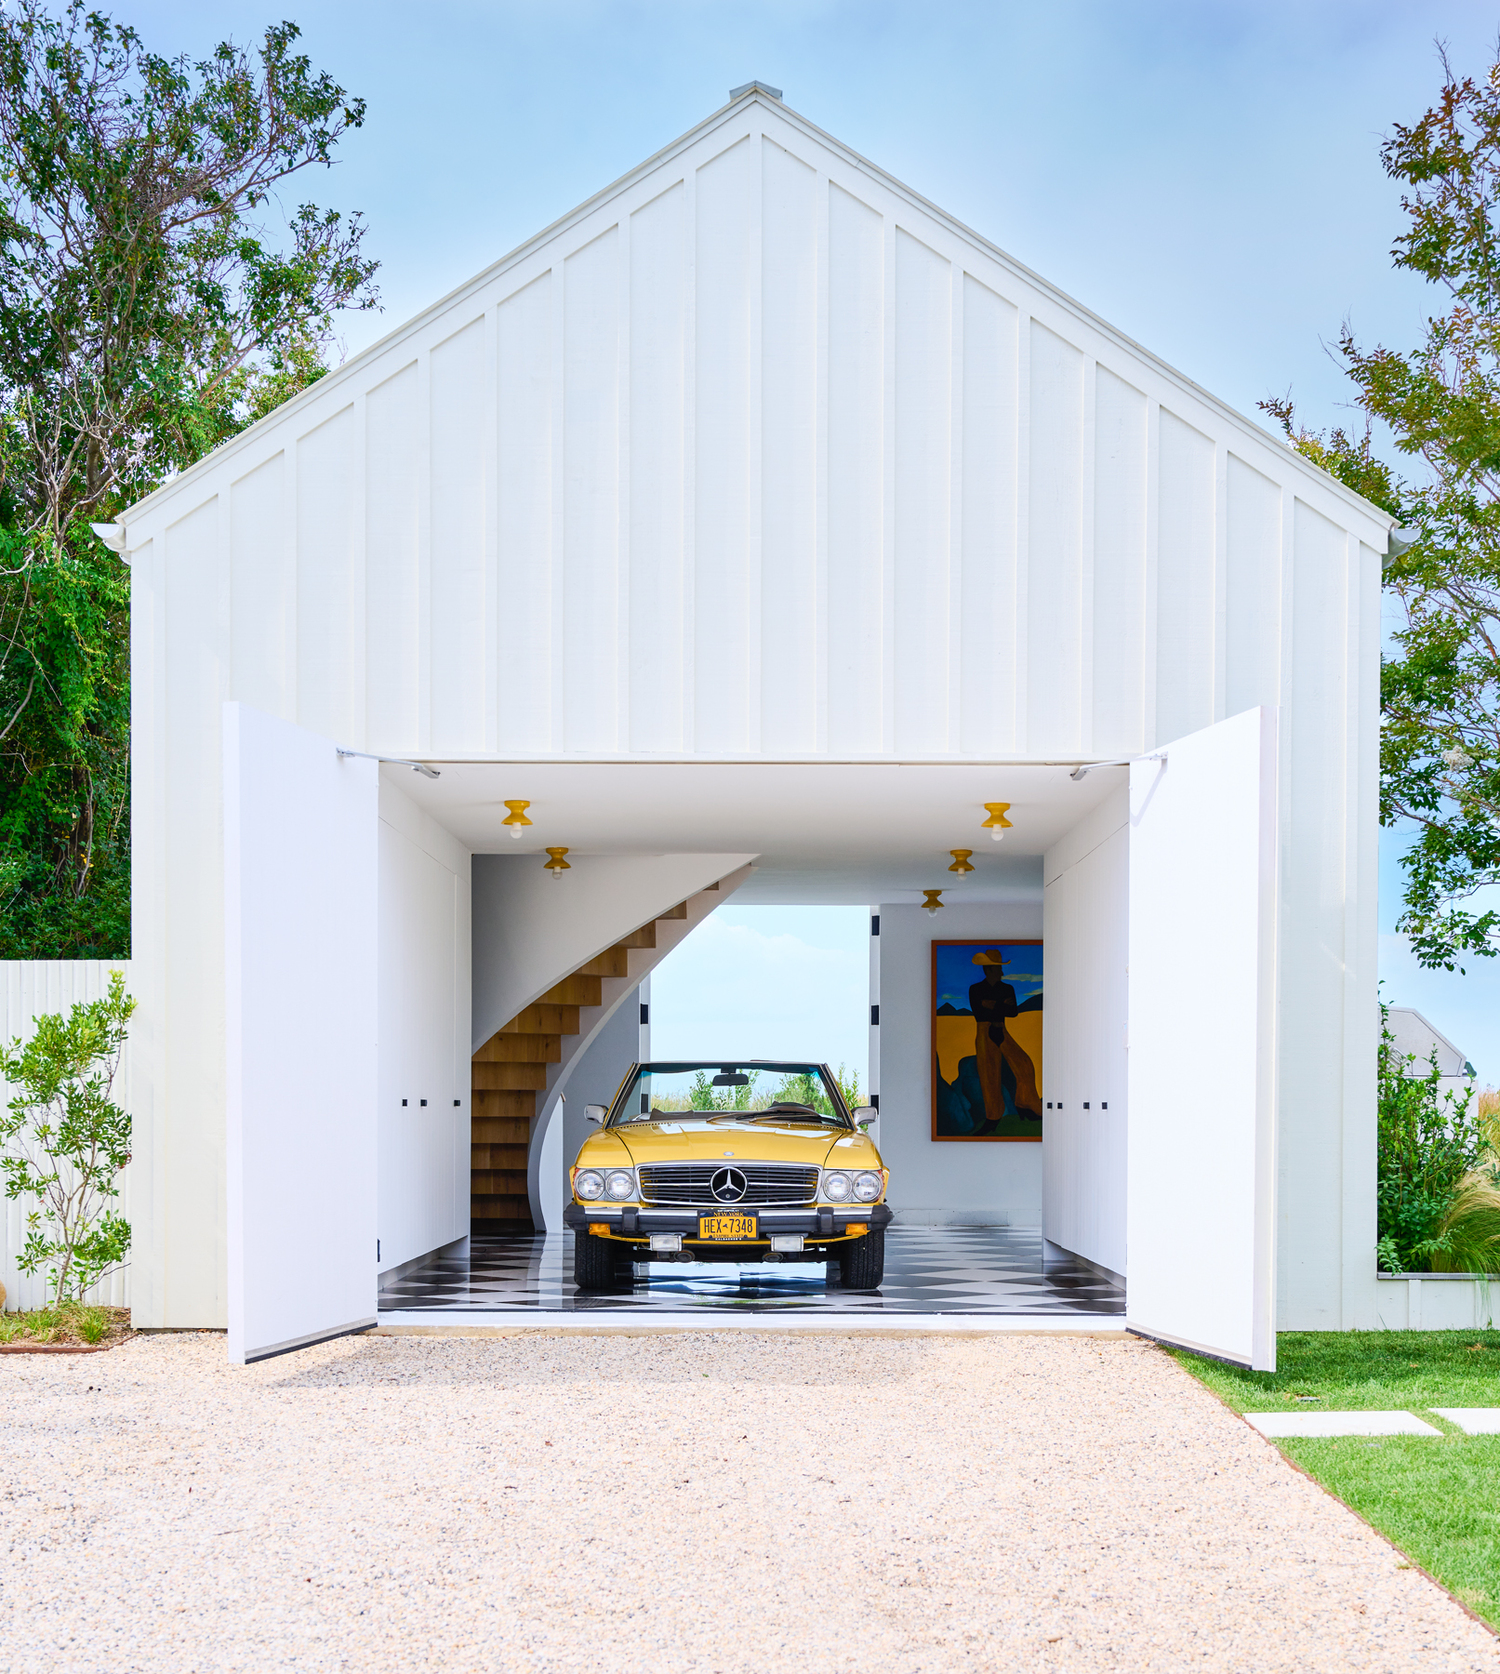 The airy garage does double duty as a dance studio and party space. WILLIAM WALDRON